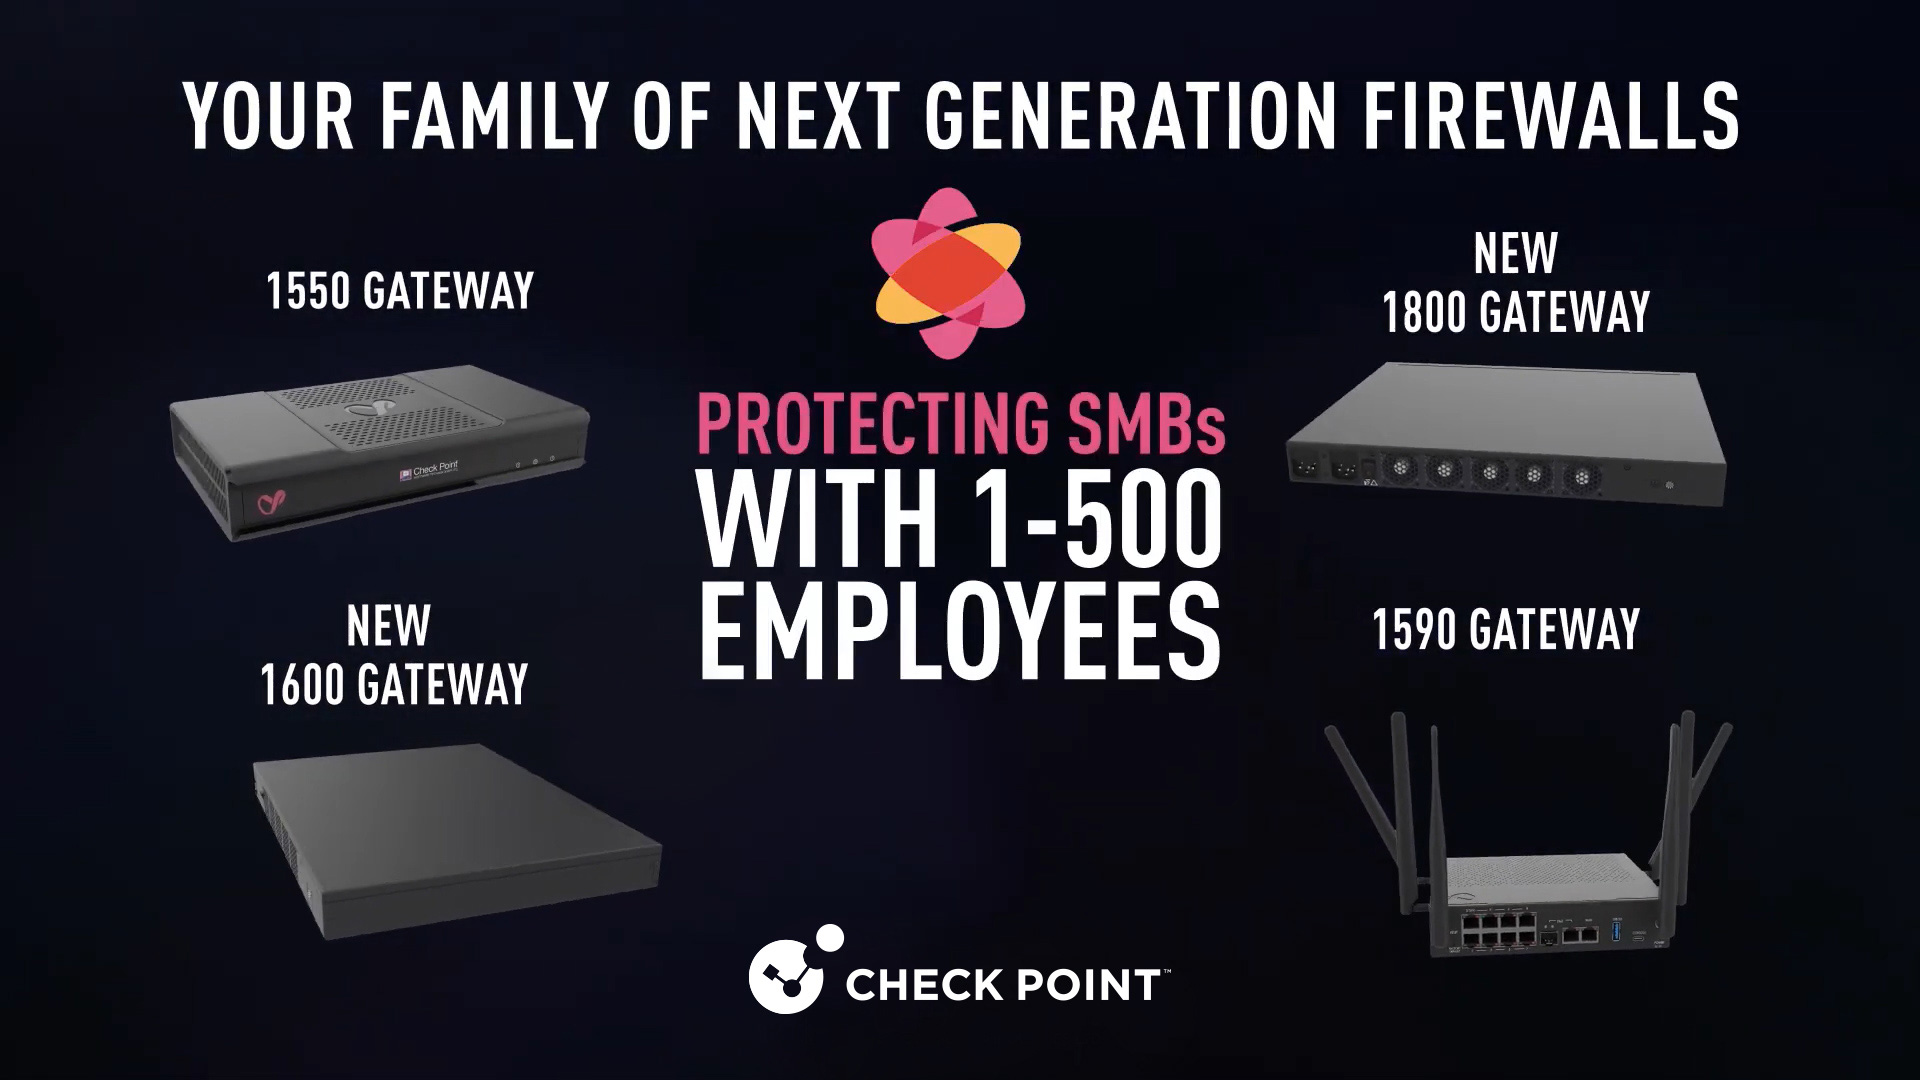 Your Family of Next Generation Firewalls: Protecting SMBs with 1-500 Employees